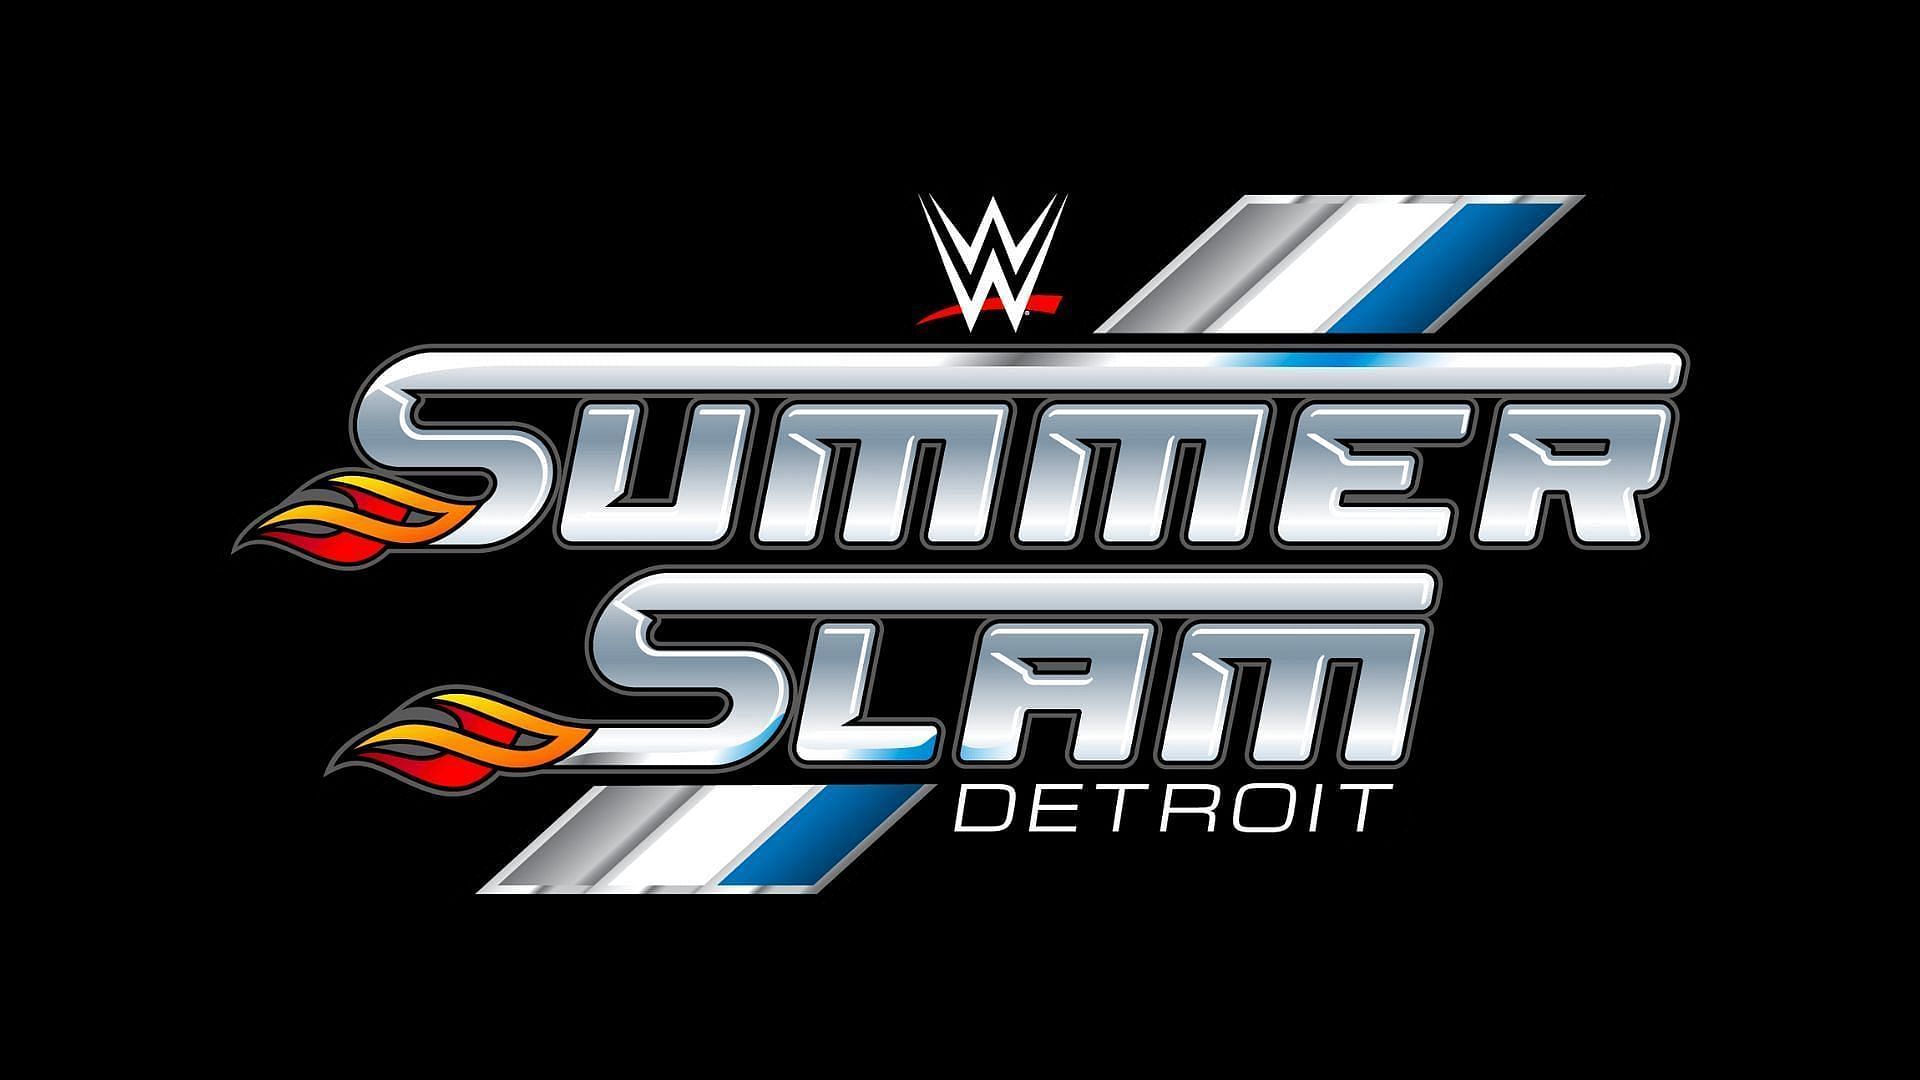 WWE held the SummerSlam premium live event on August 5